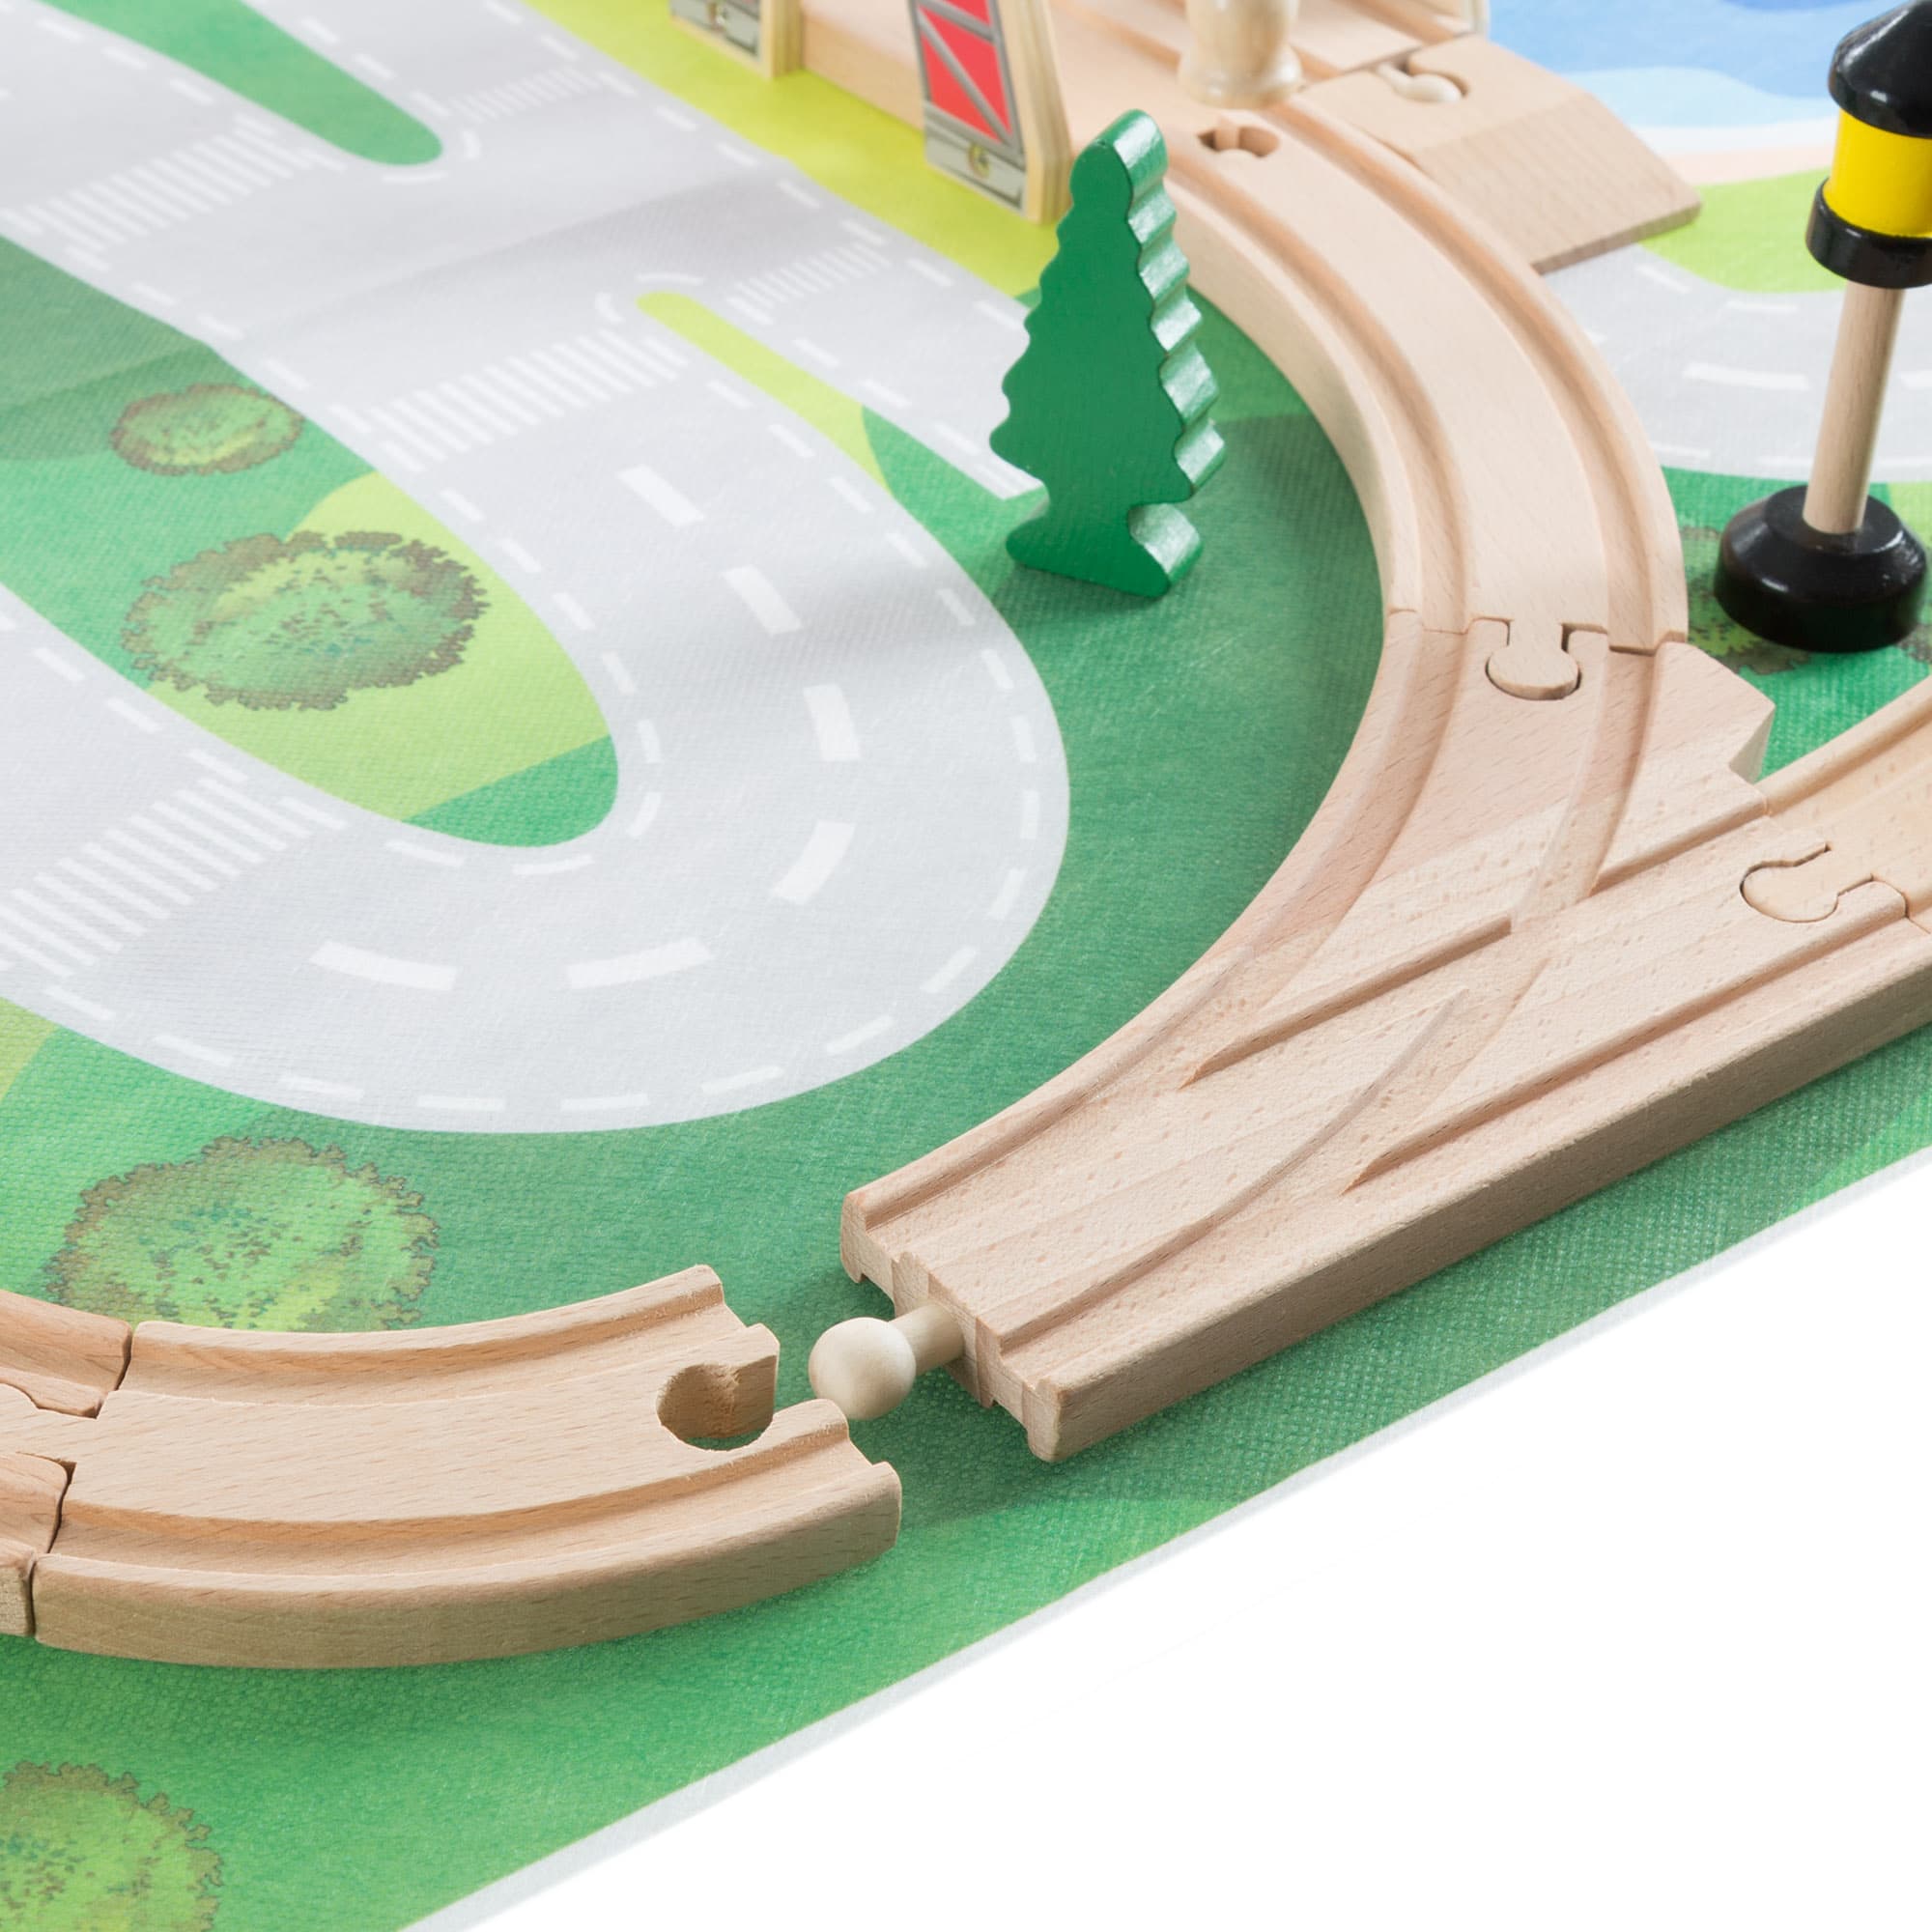 Toy Time Wooden Train Set with Play Mat